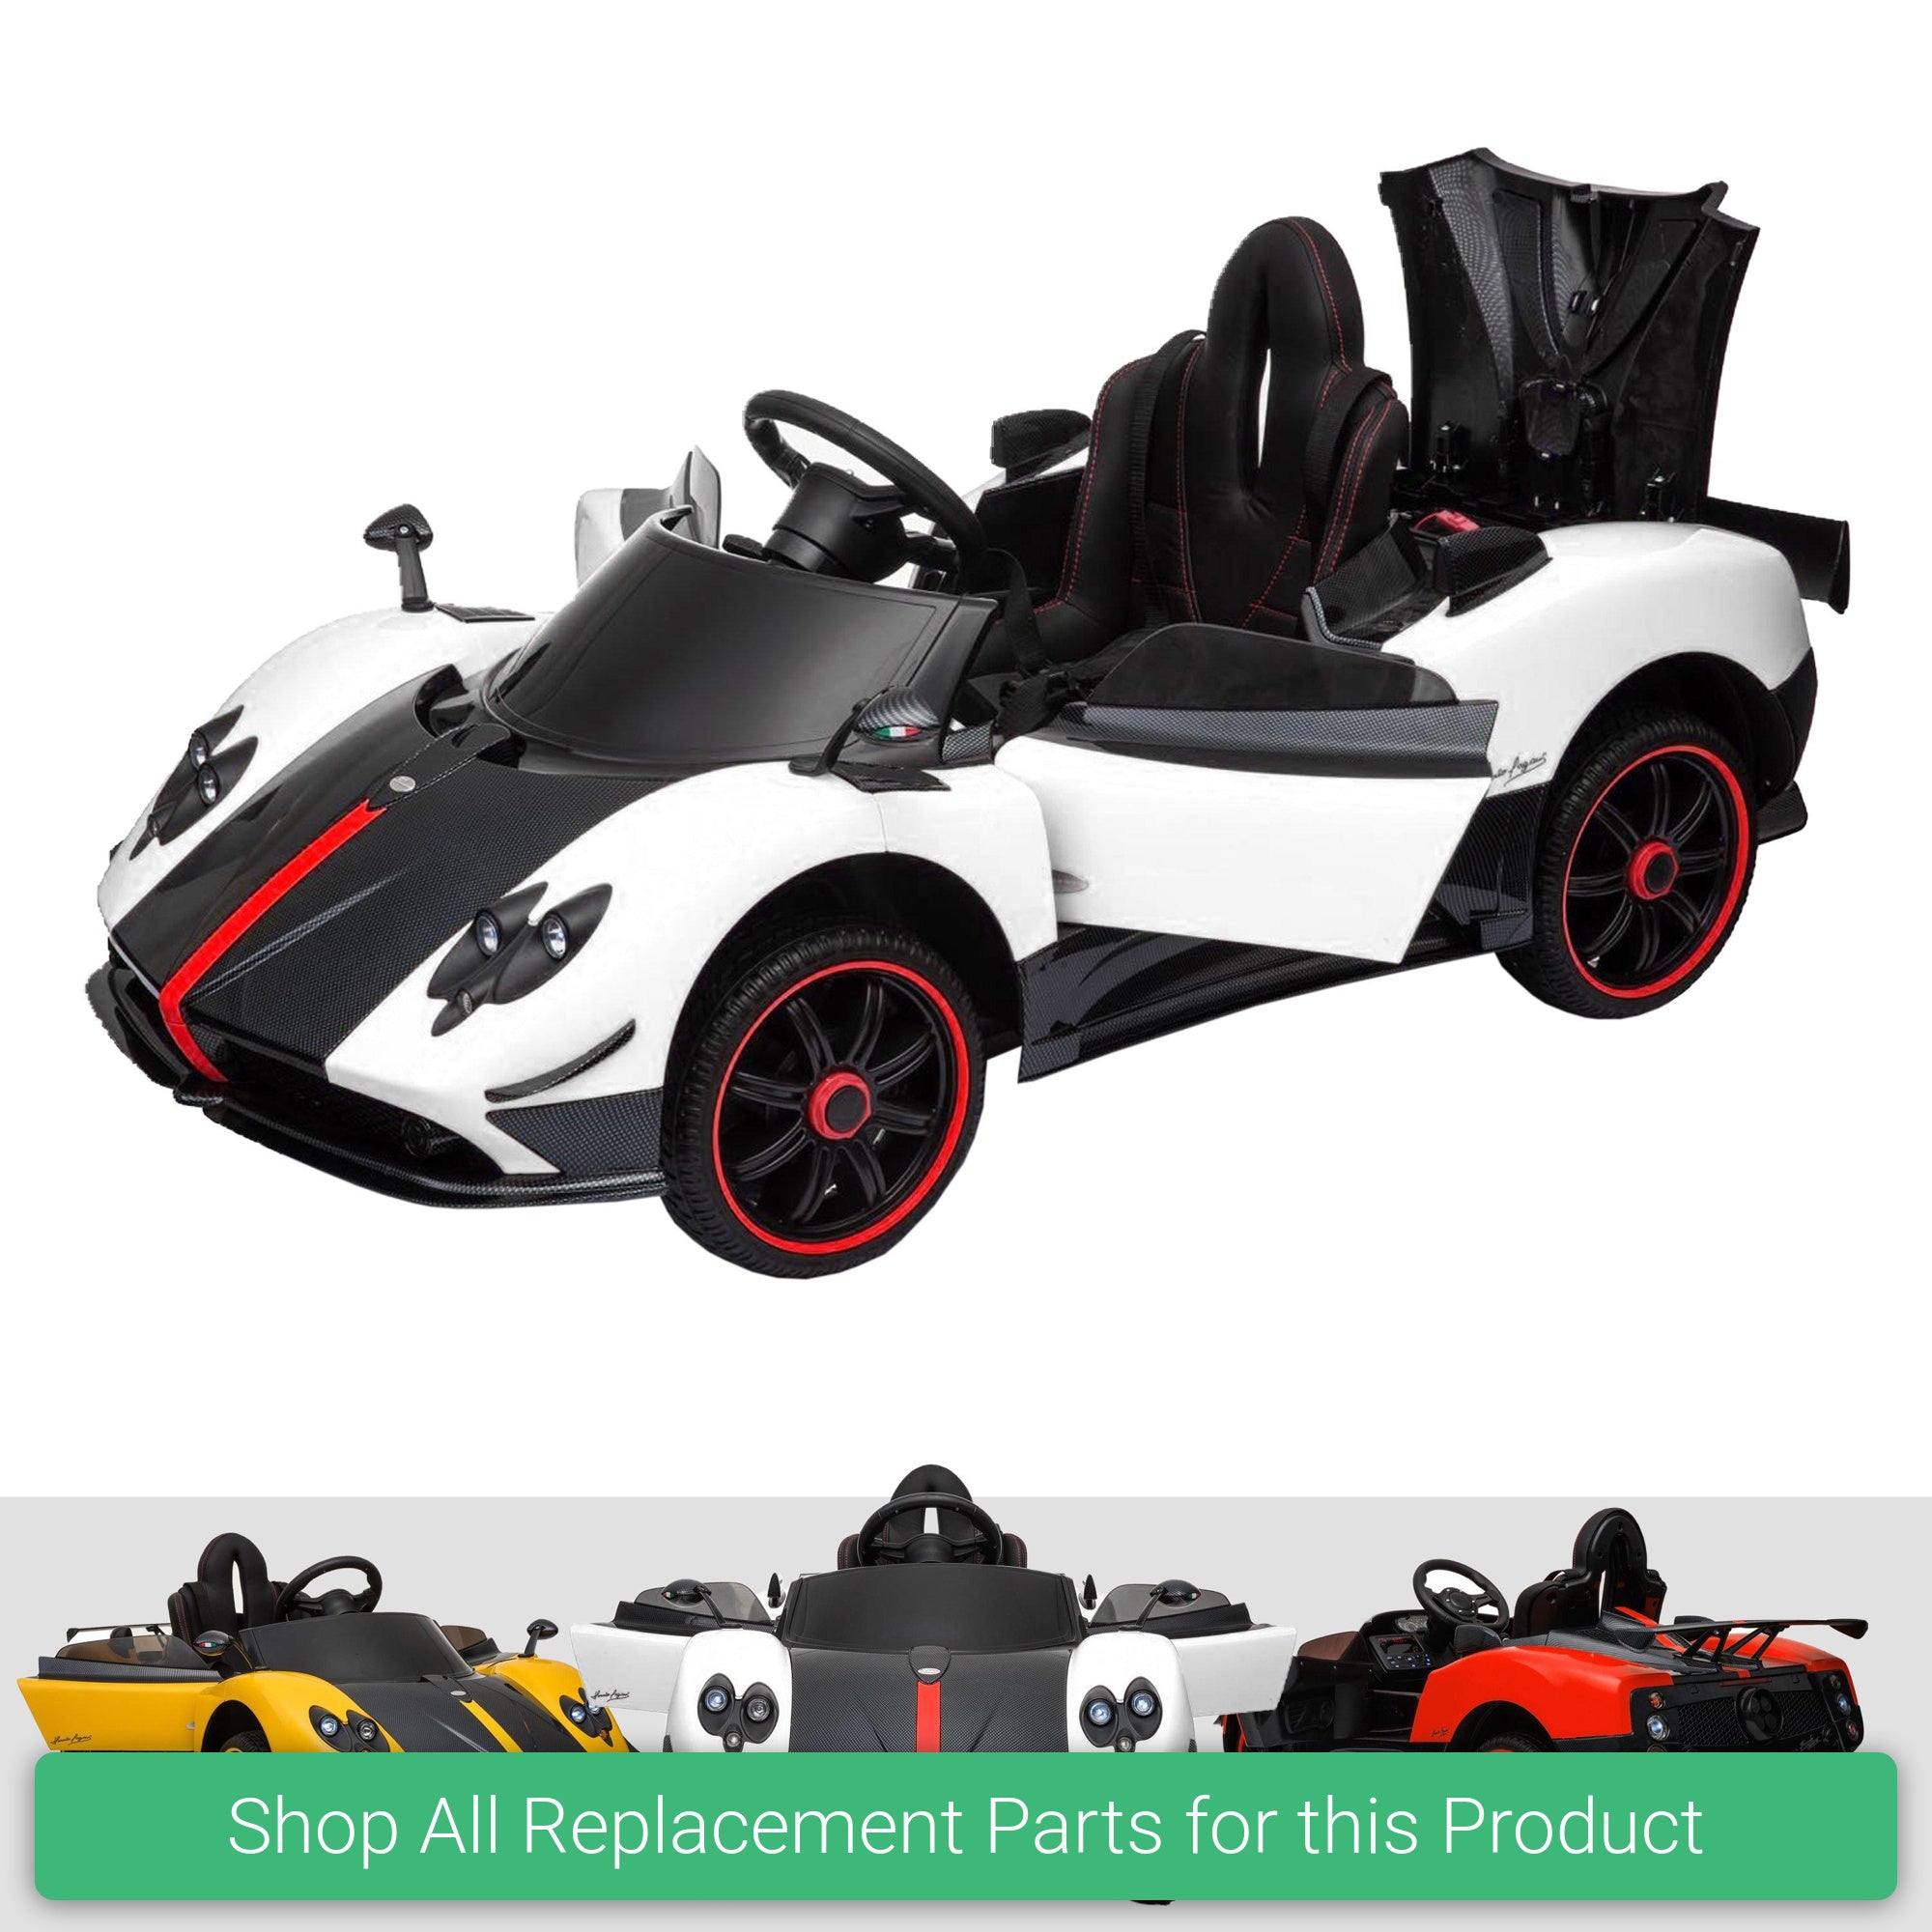 Replacement Parts and Spares for Kids Pagani Zonda - PAG-1-VARI - SX1788